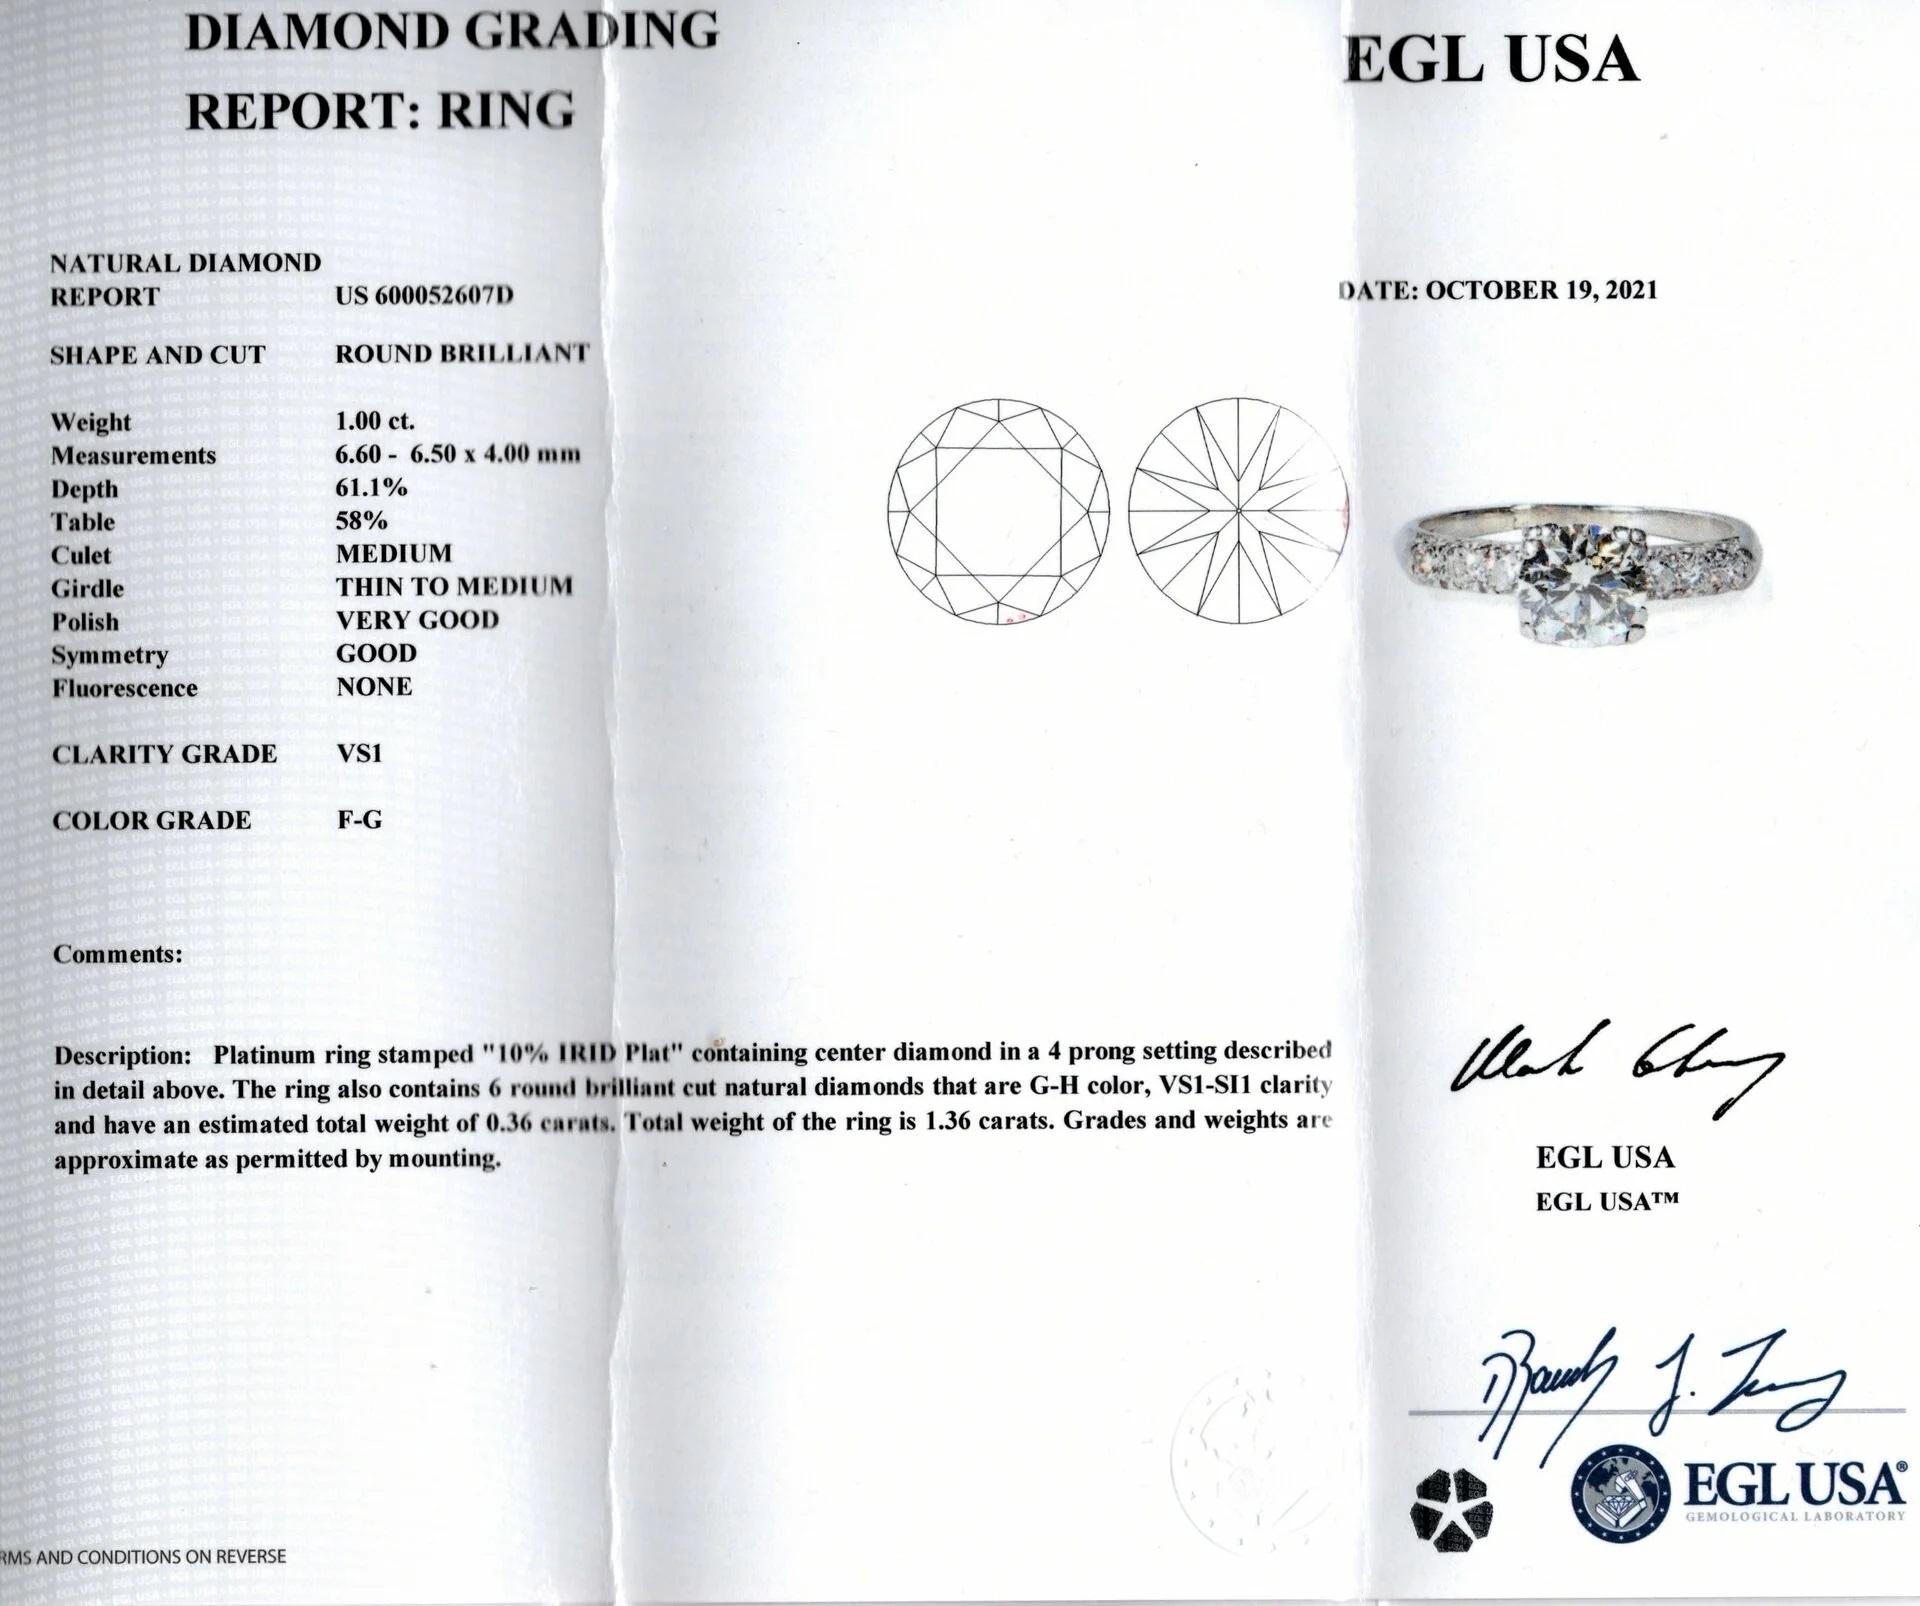  classic diamond ring has a time tested design and features a very high quality 1 carat diamond center!

Highlights:

- 1.00ct natural diamond center

- Certified by EGL-USA

- High quality, bright white, and exceptionally clean, graded F-G VS1

-